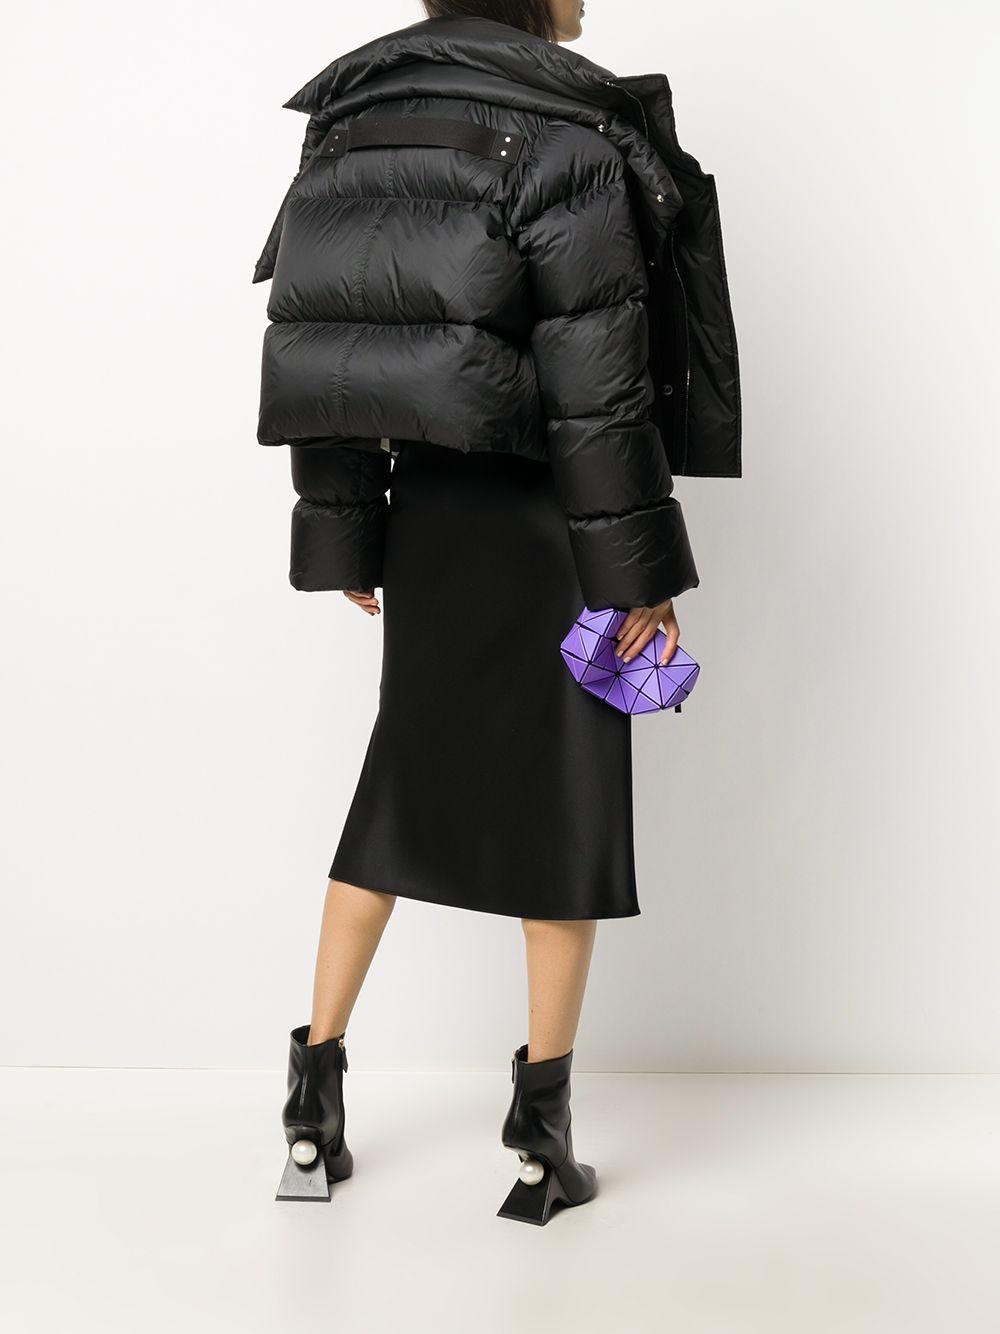 Rick Owens Synthetic Oversized Puffer Jacket in Black - Lyst